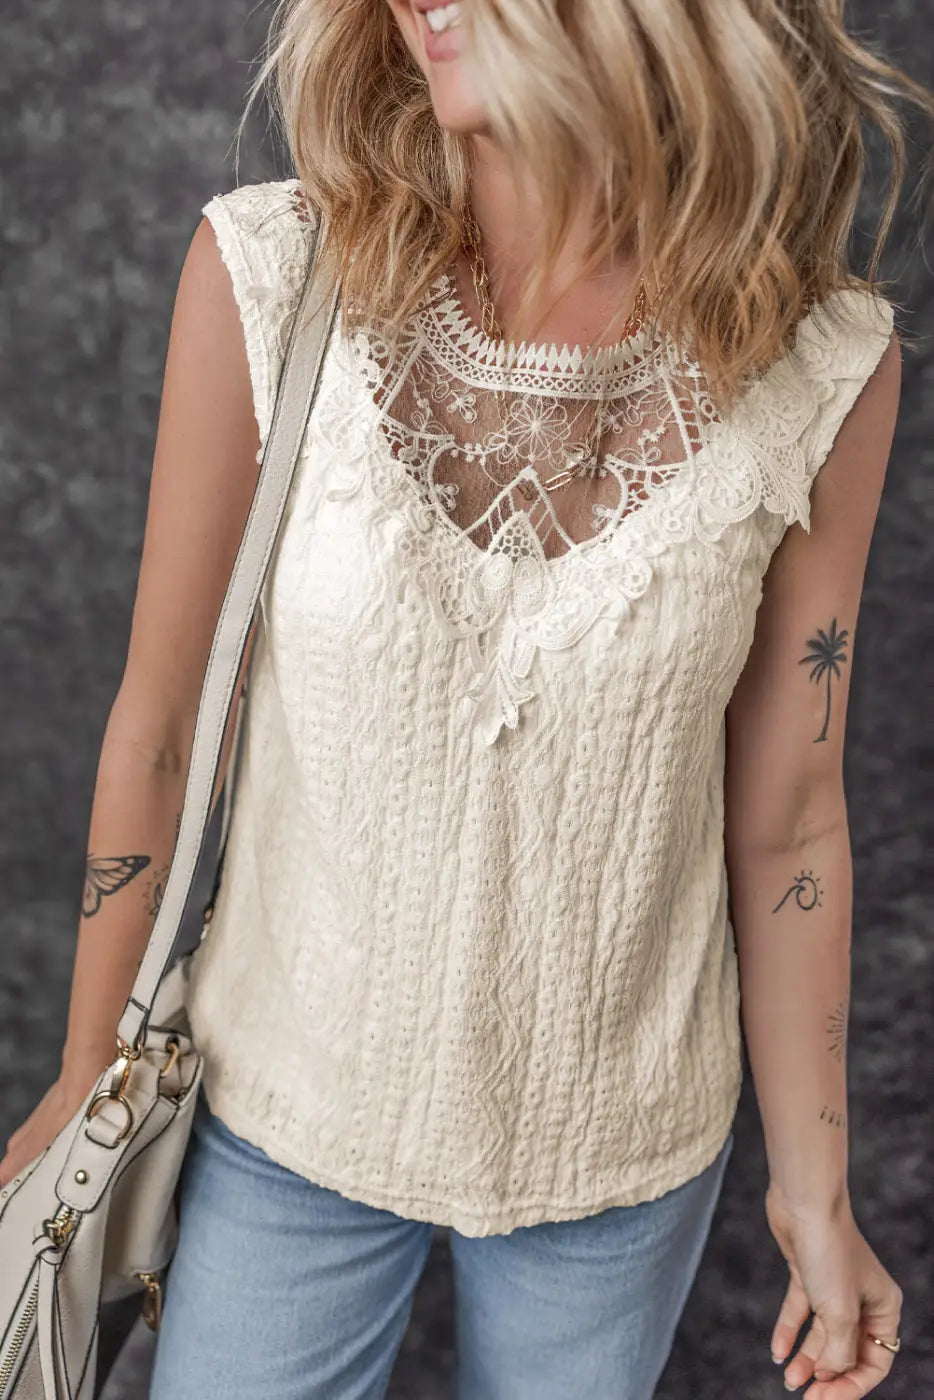 Apricot guipure lace crochet keyhole back tank top - s / 97% polyester + 3% elastane - tops